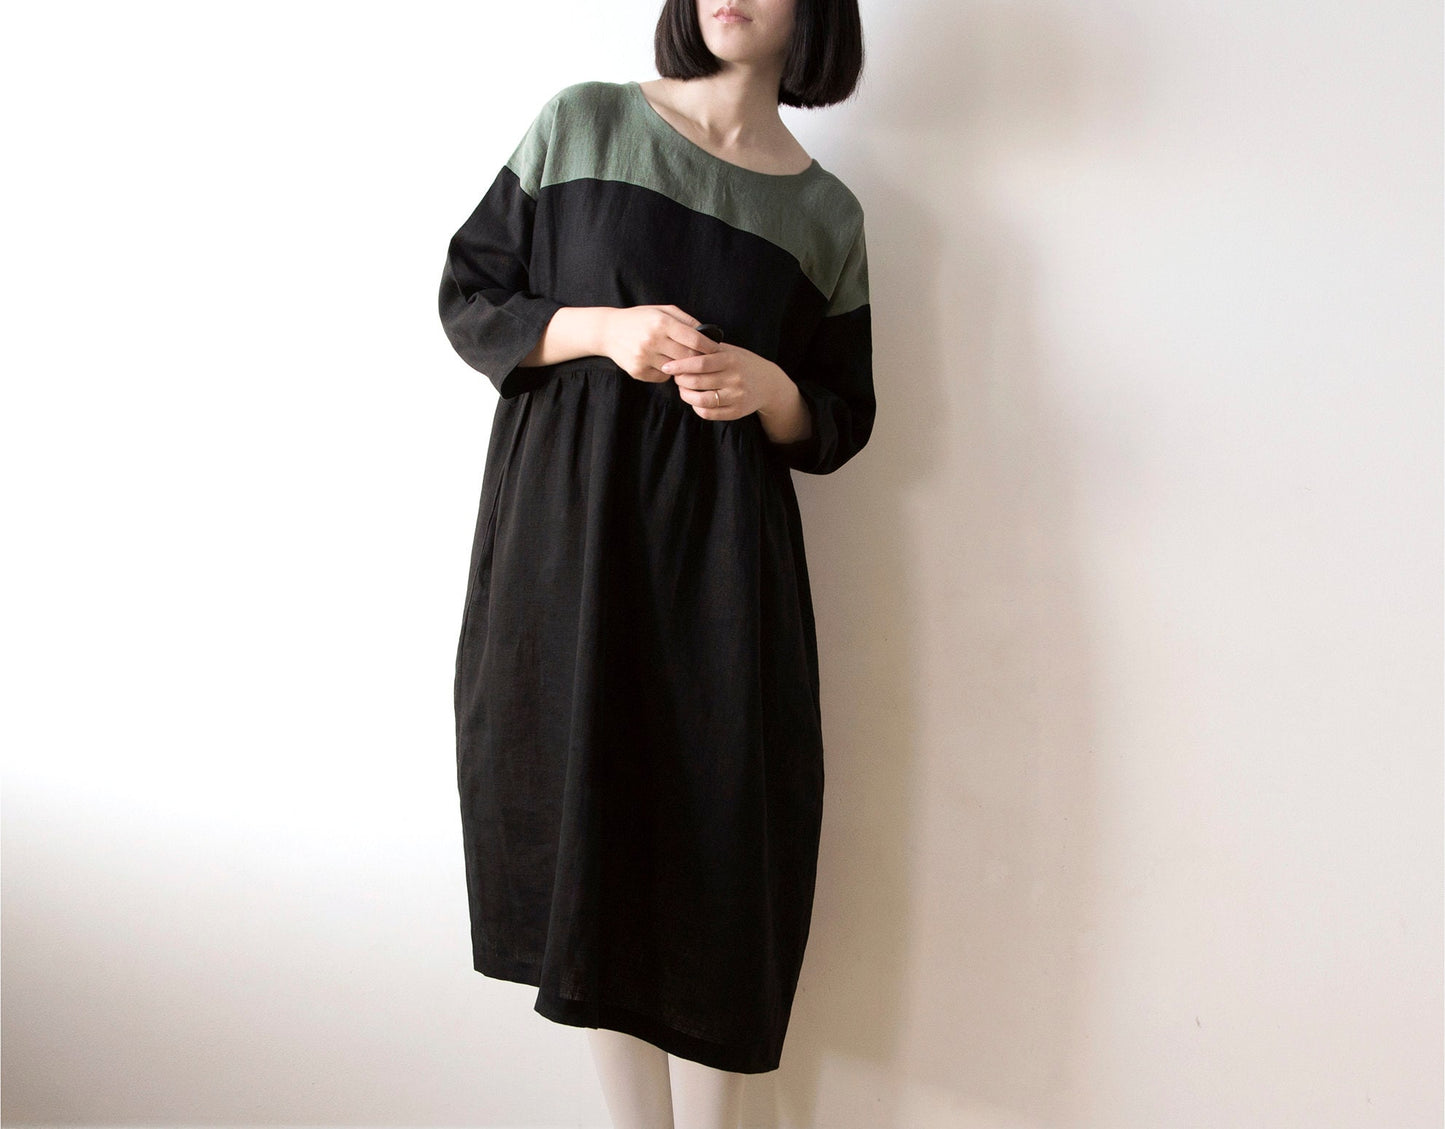 Ink black and muted green linen dress